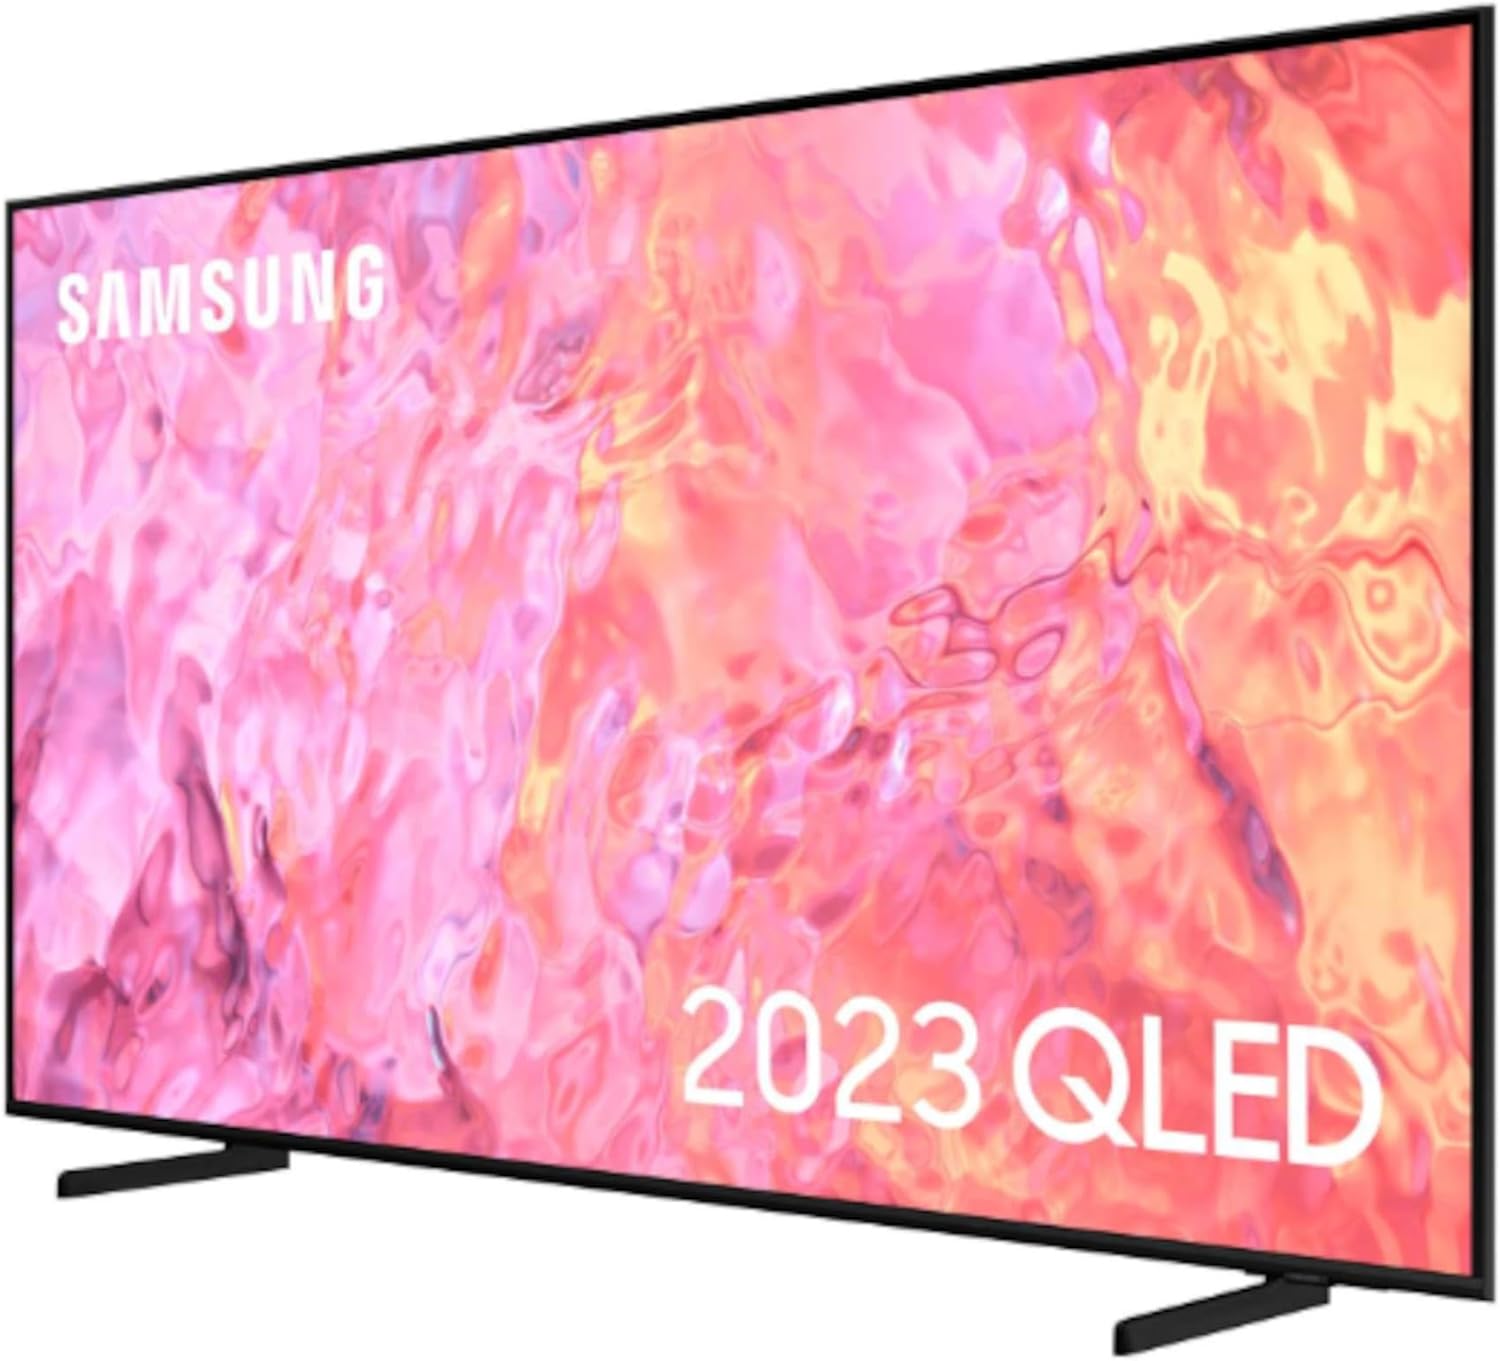 Samsung 55 Inch Q60C QLED 4K HDR Smart TV (2023) - Dual LED Television, Alexa Built - In, Super Ultrawide Gaming View Screen, 100% Colour Volume With Quantum Dot, Crystal 4K Processor, Airslim Profile - Amazing Gadgets Outlet